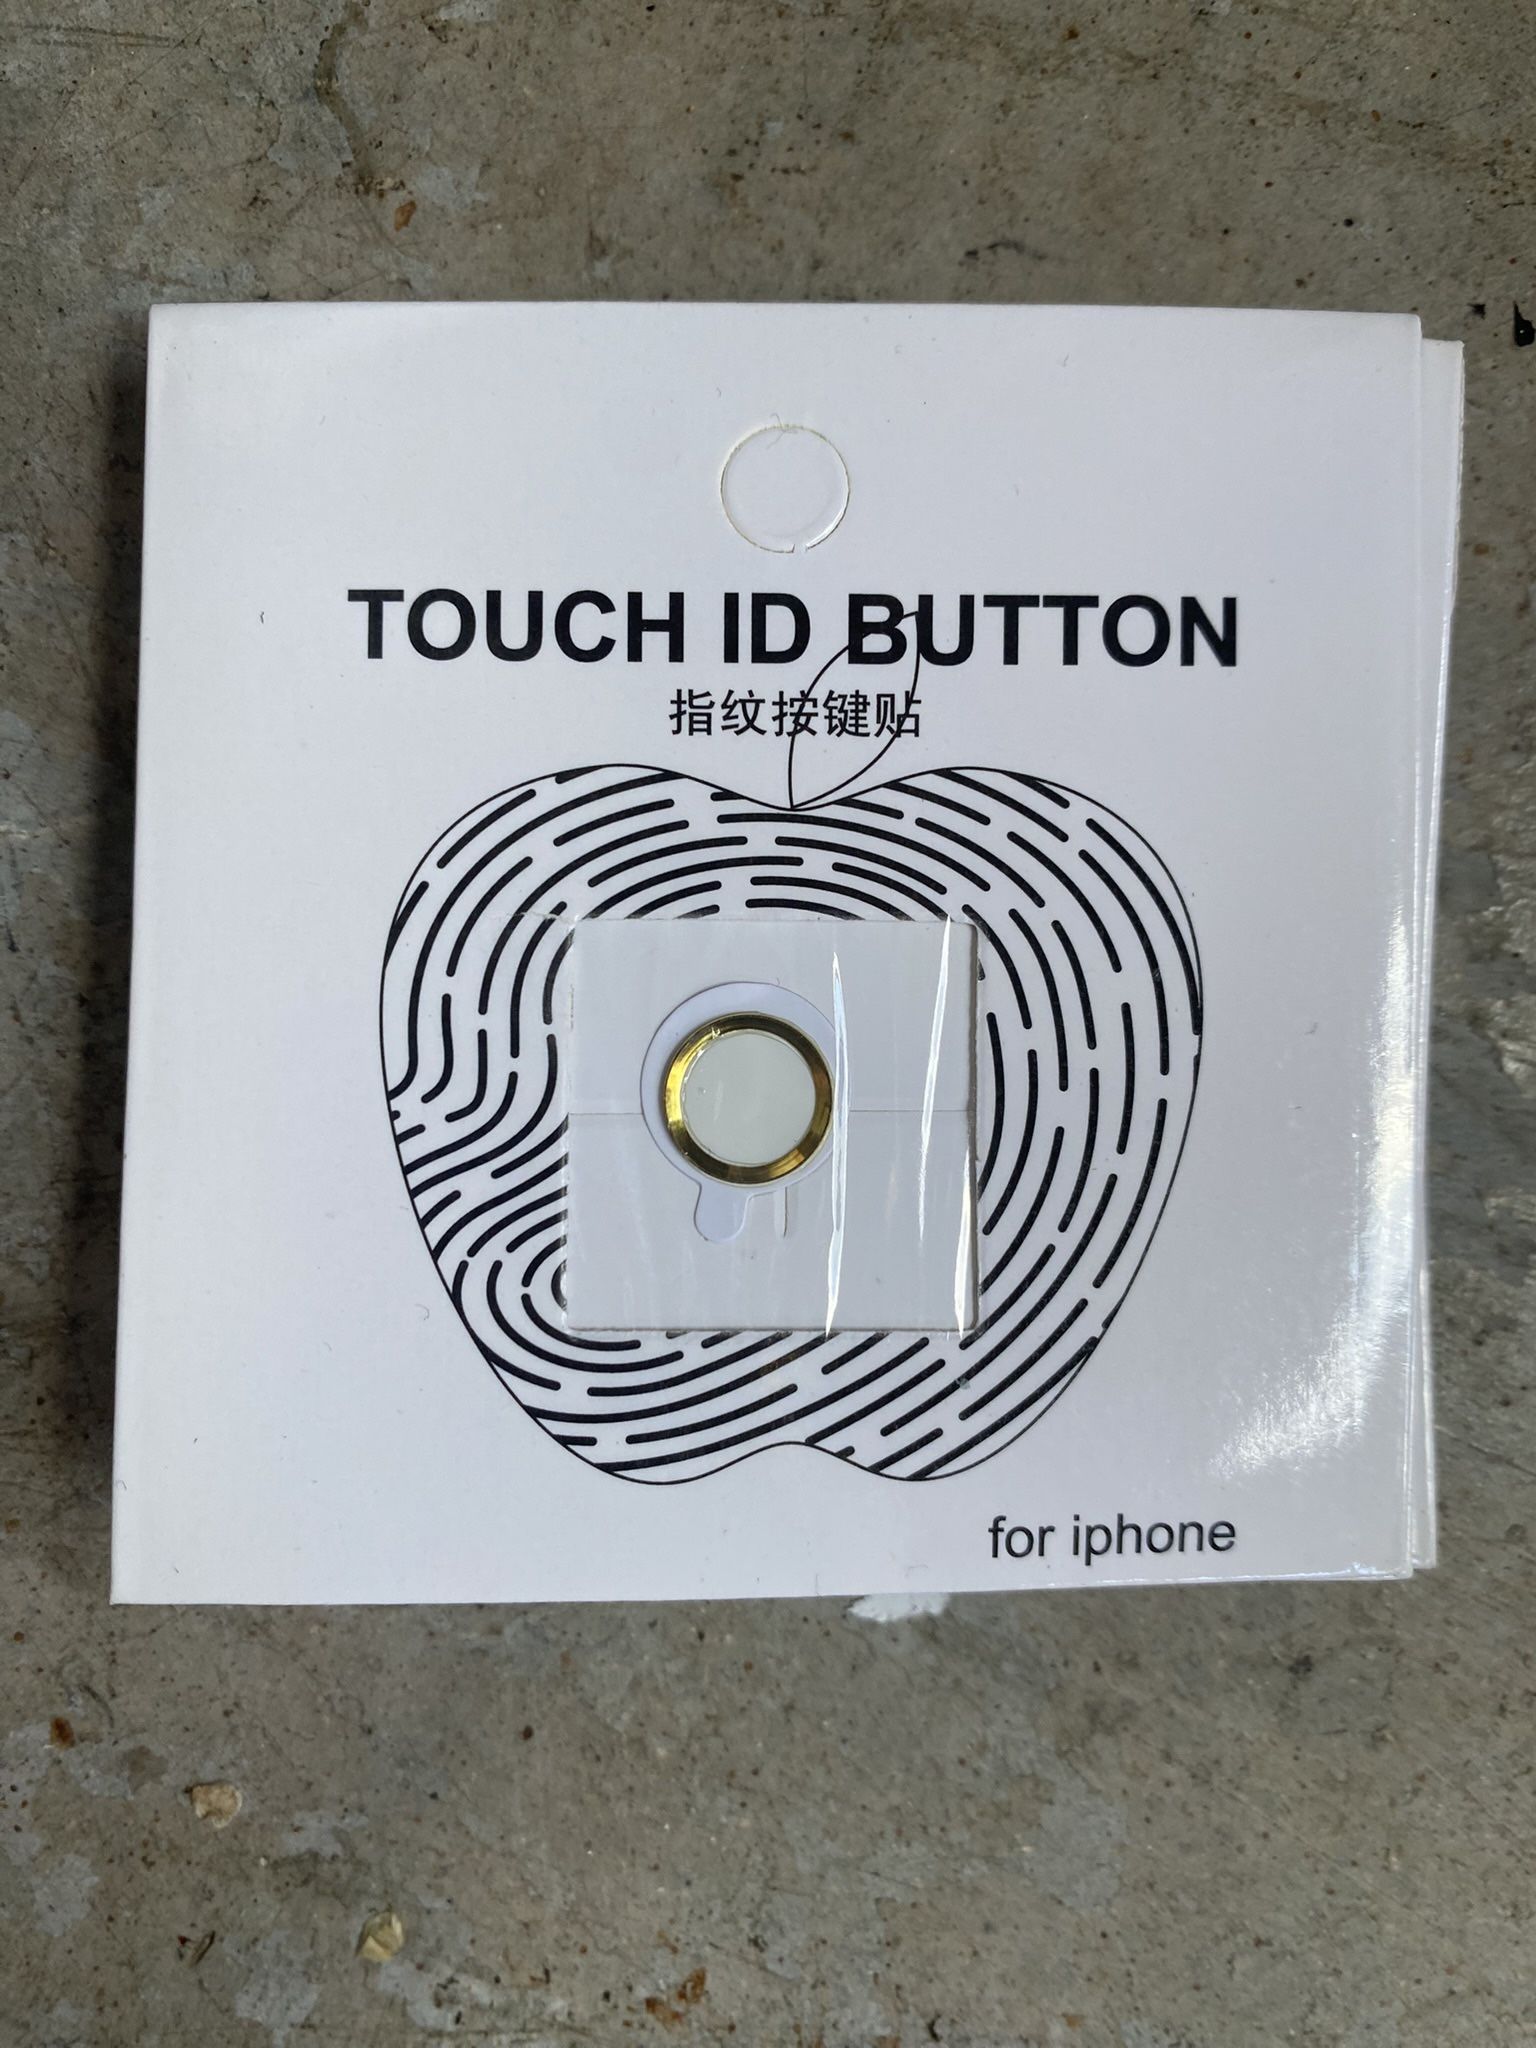 iPhones Tuch Id Button $7